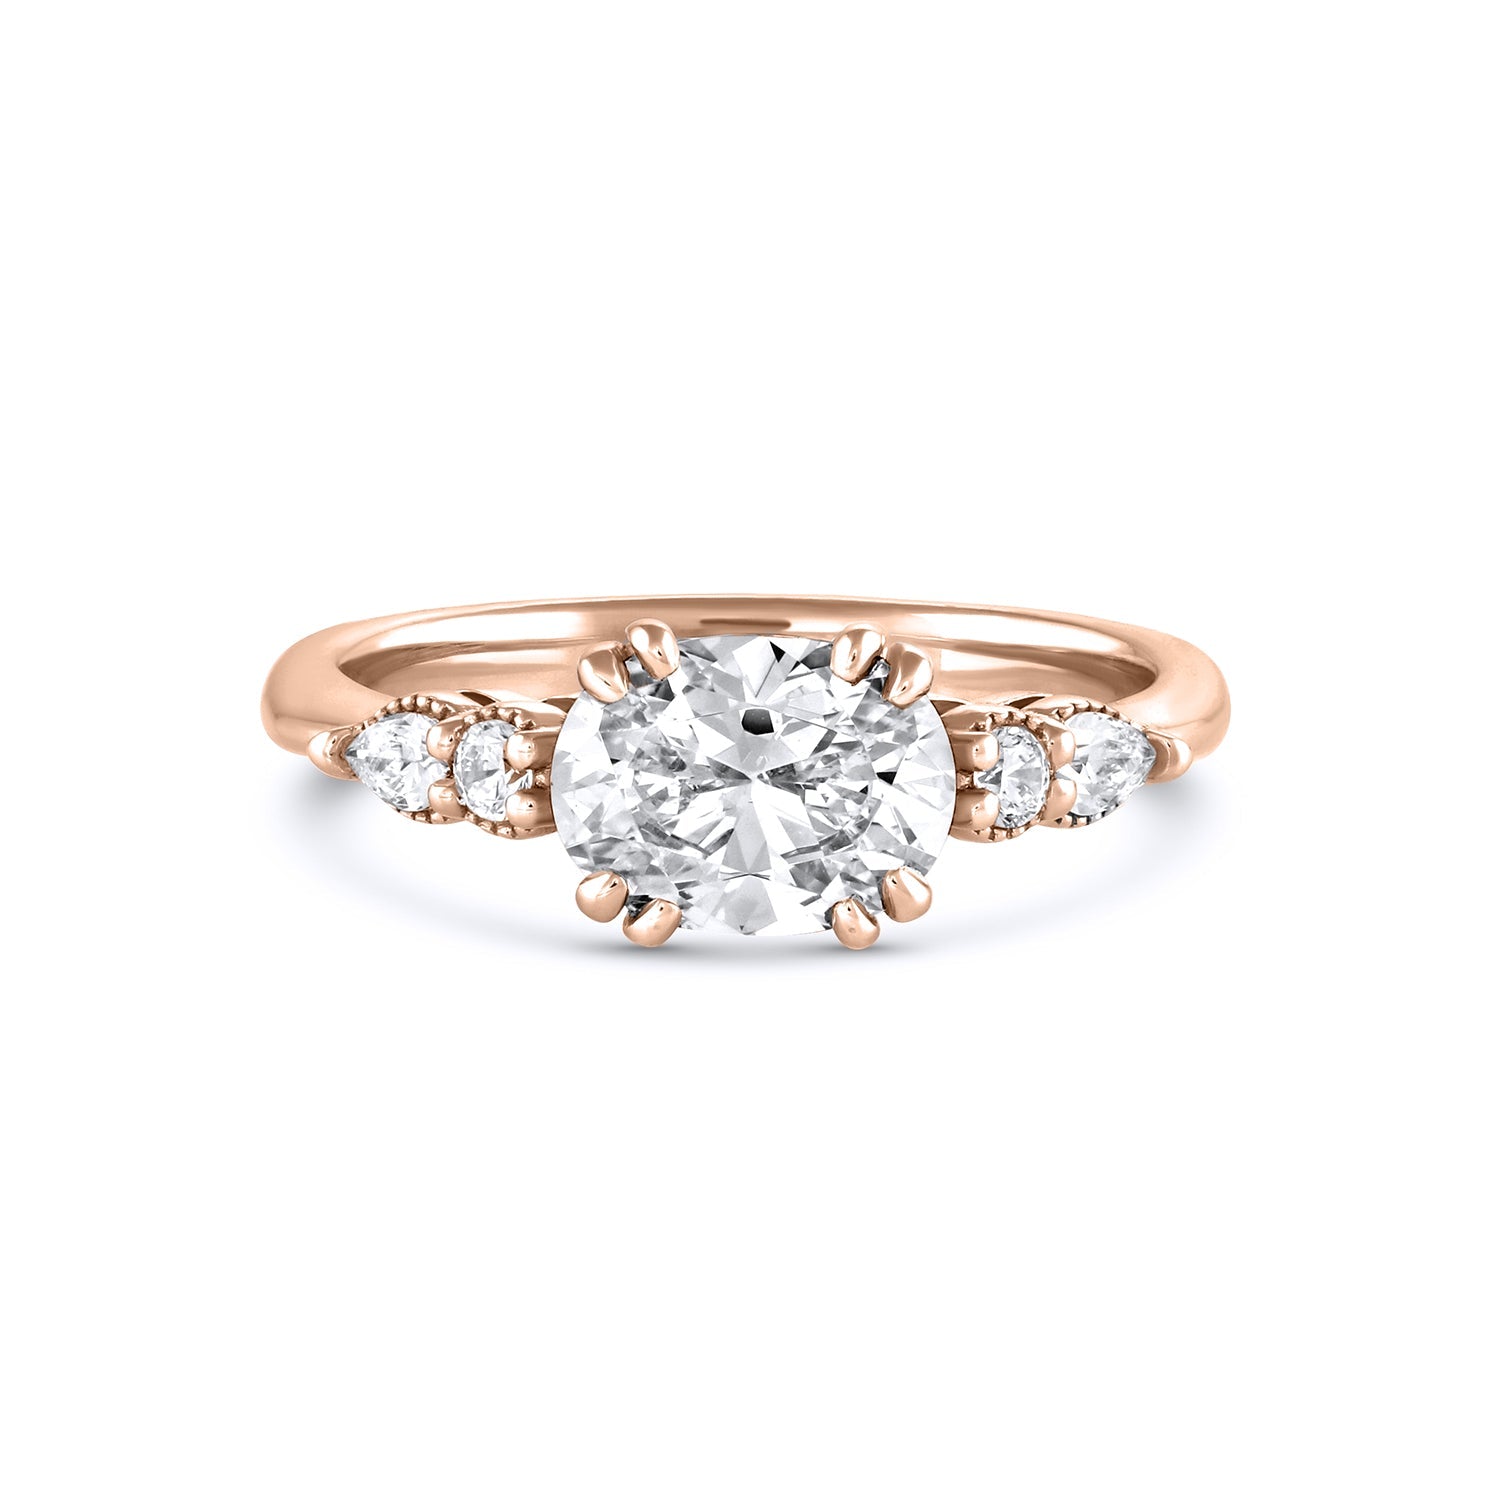 East to West Oval Diamond Halo Engagement Ring - South Bay Jewelry